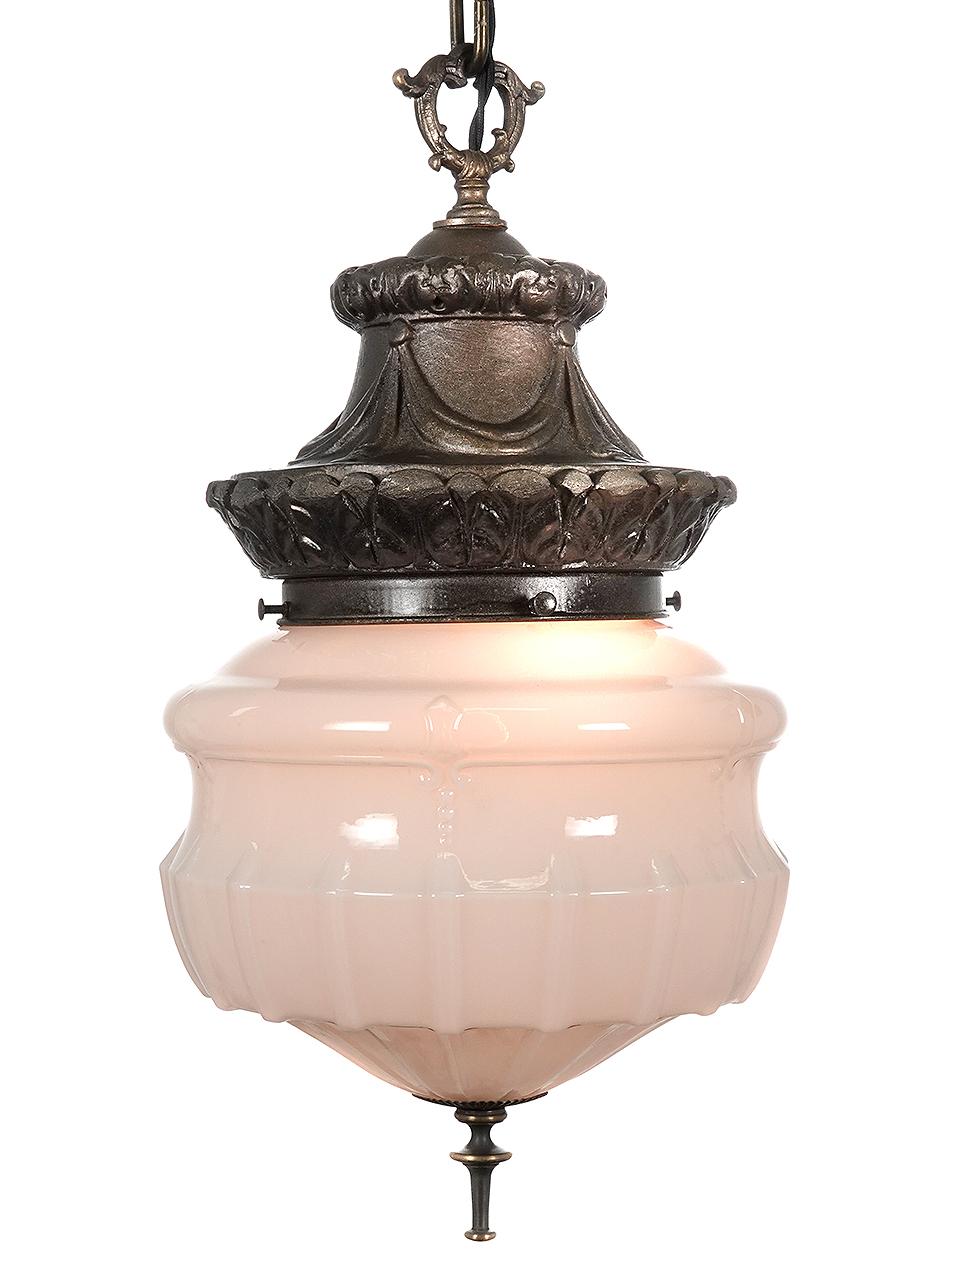 This is a nice matching pair of decorative pendents. The plaster shade holder has an organic form and creates an interesting crown. The bottom has a long turned brass detail. The milk glass shade it self has an impressive 10 inch diameter an is